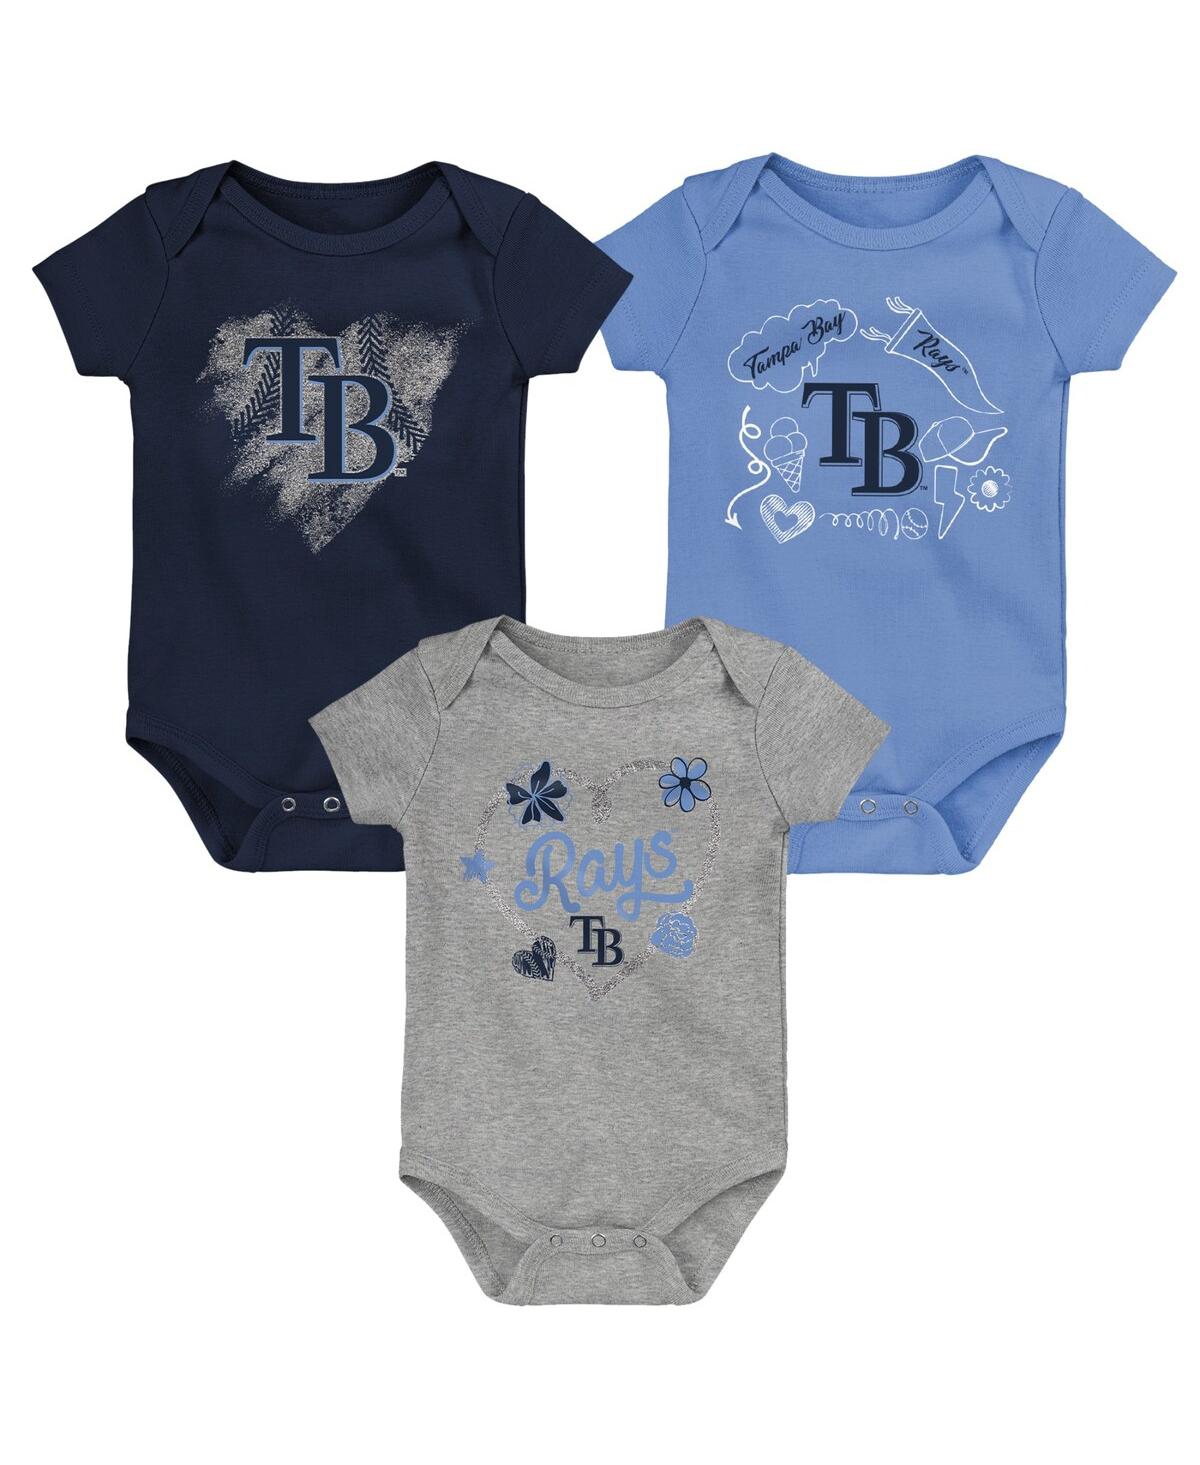 Outerstuff Babies' Infant Boys And Girls Navy, Light Blue, Heathered Gray Tampa Bay Rays Batter Up 3-pack Bodysuit Set In Navy,light Blue,heathered Gray